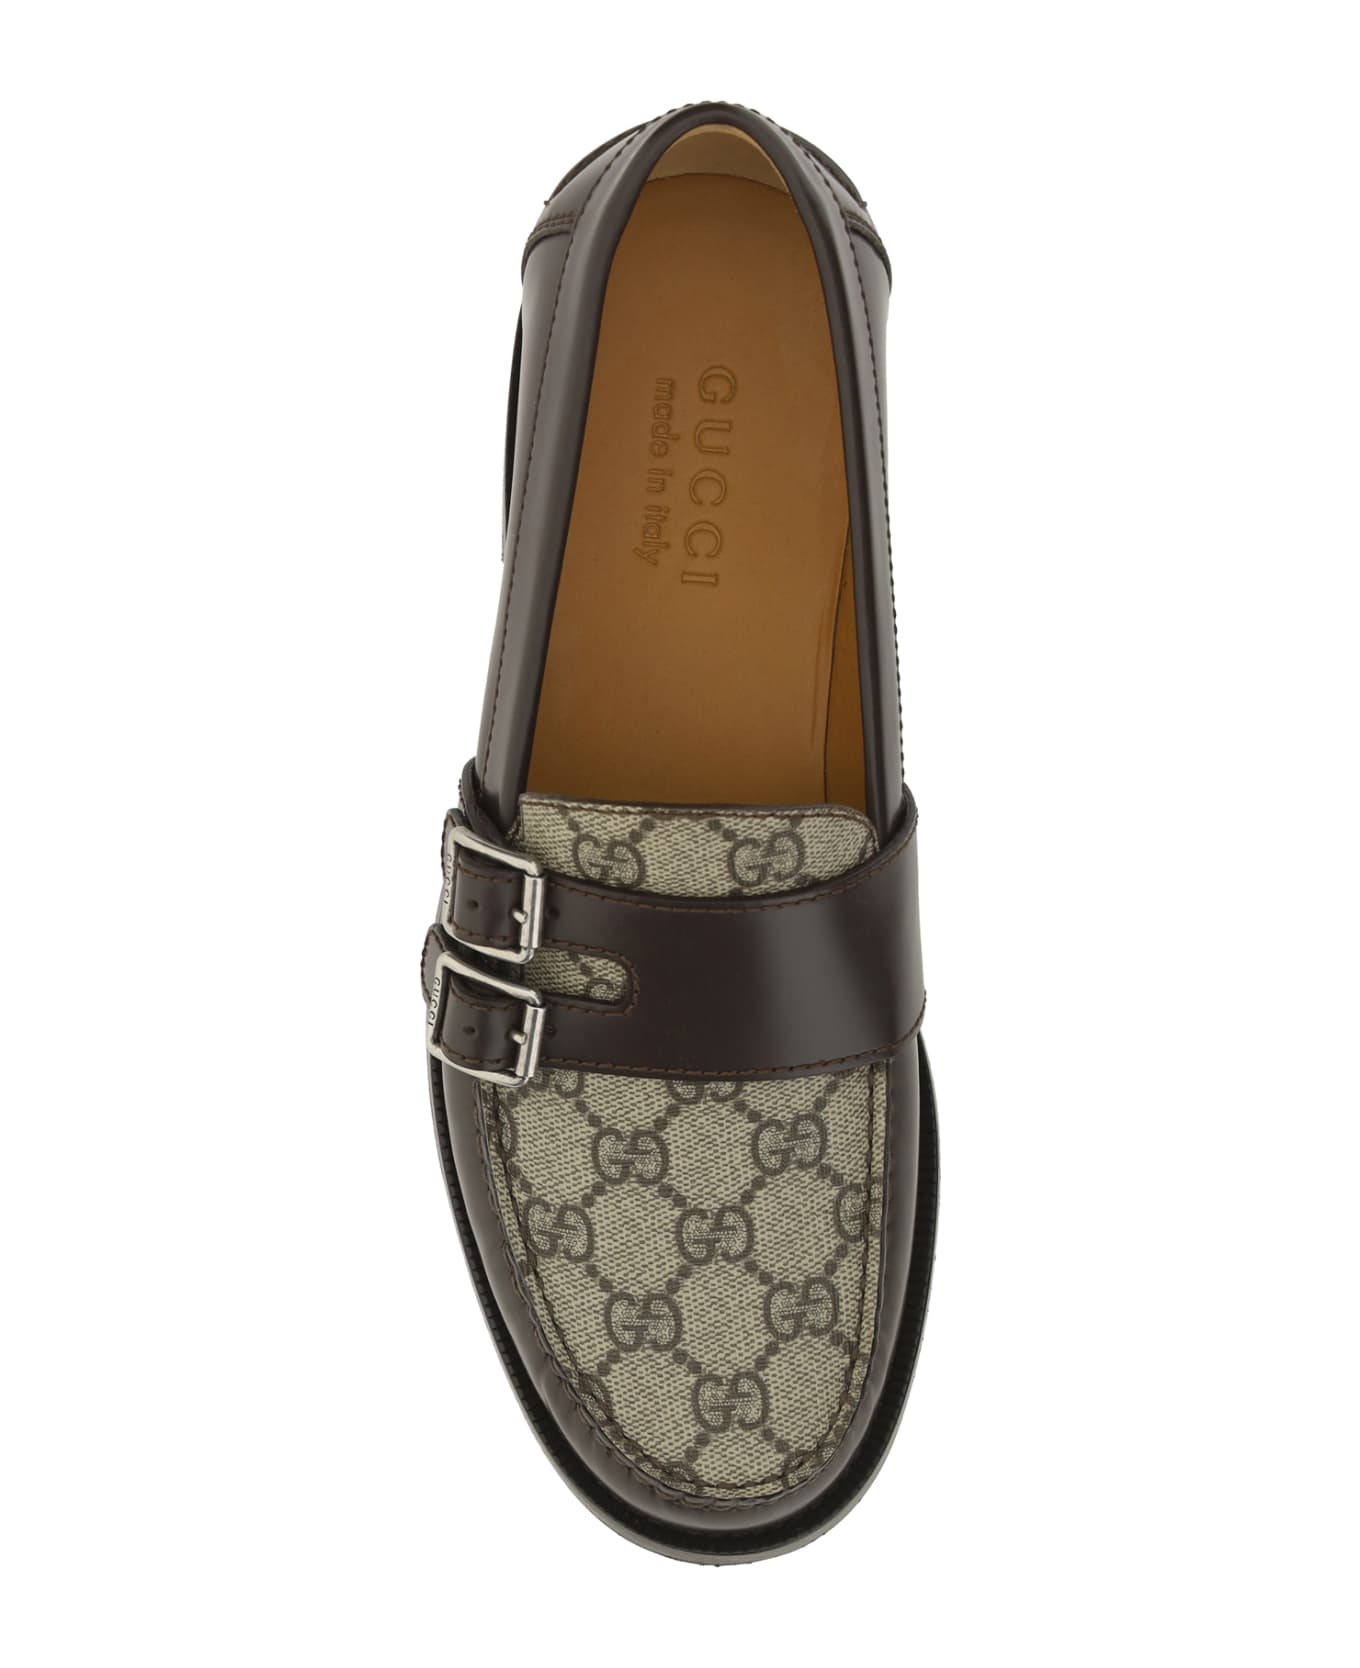 Gucci Loafers - Cocoa/beige ローファー＆デッキシューズ